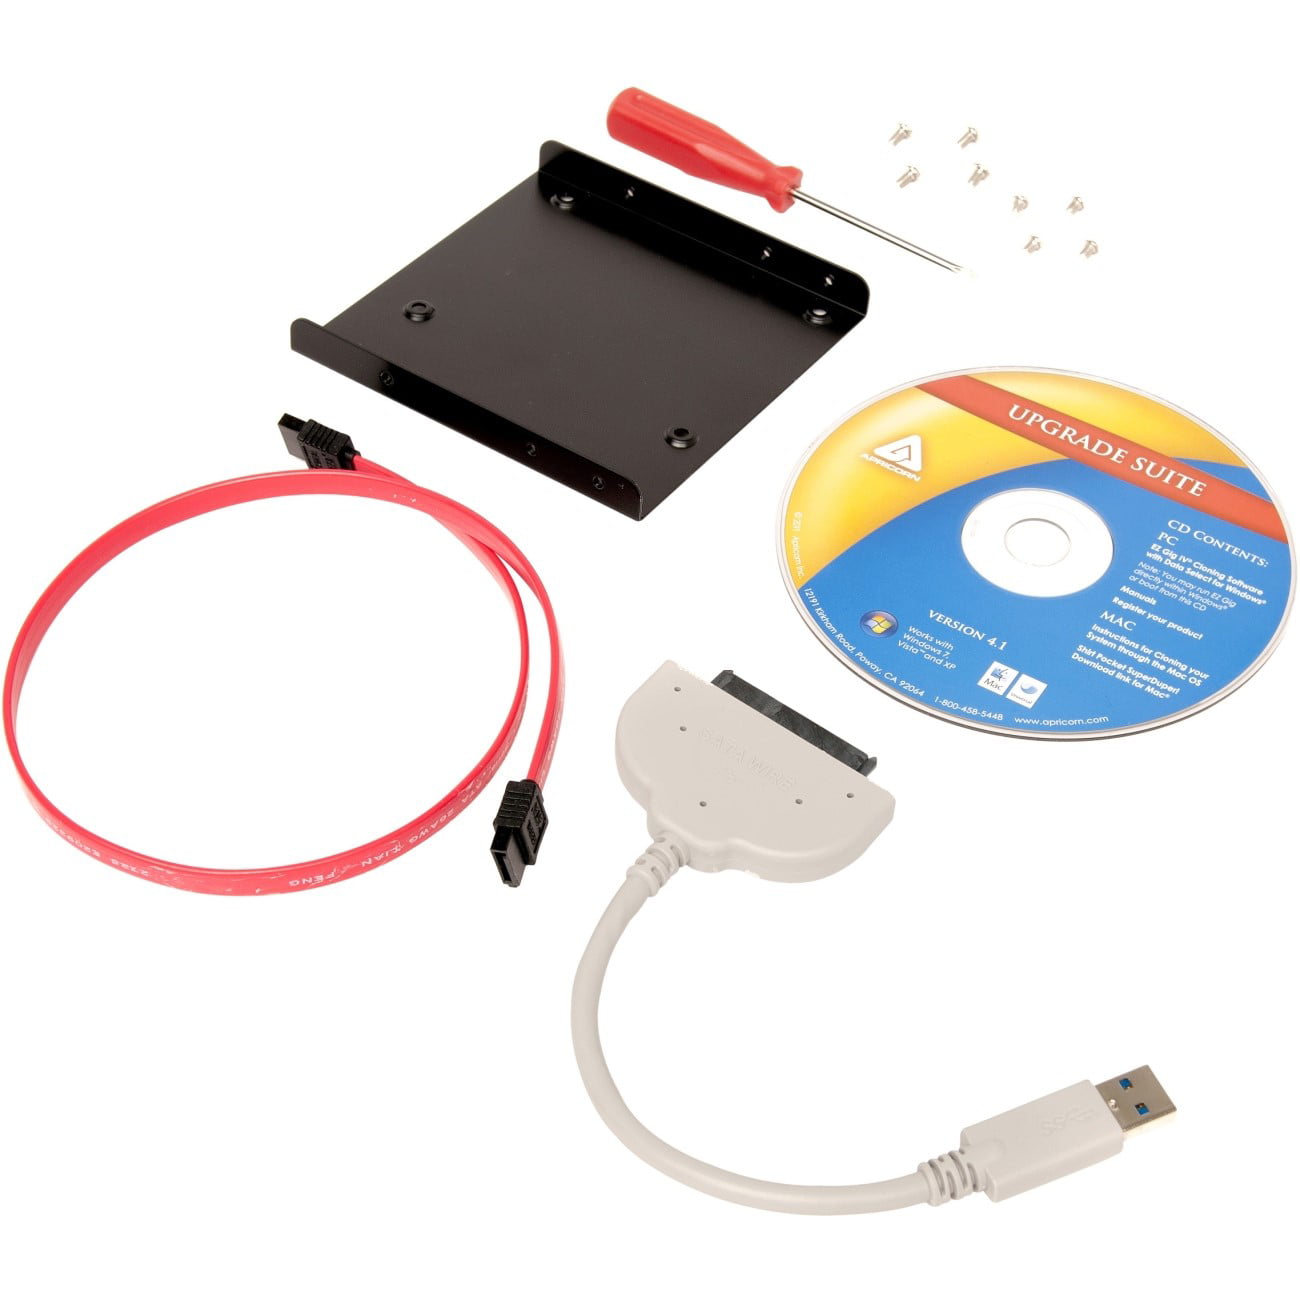 SanDisk SSD Conversion Kit - Step by Step Software and Hardware 